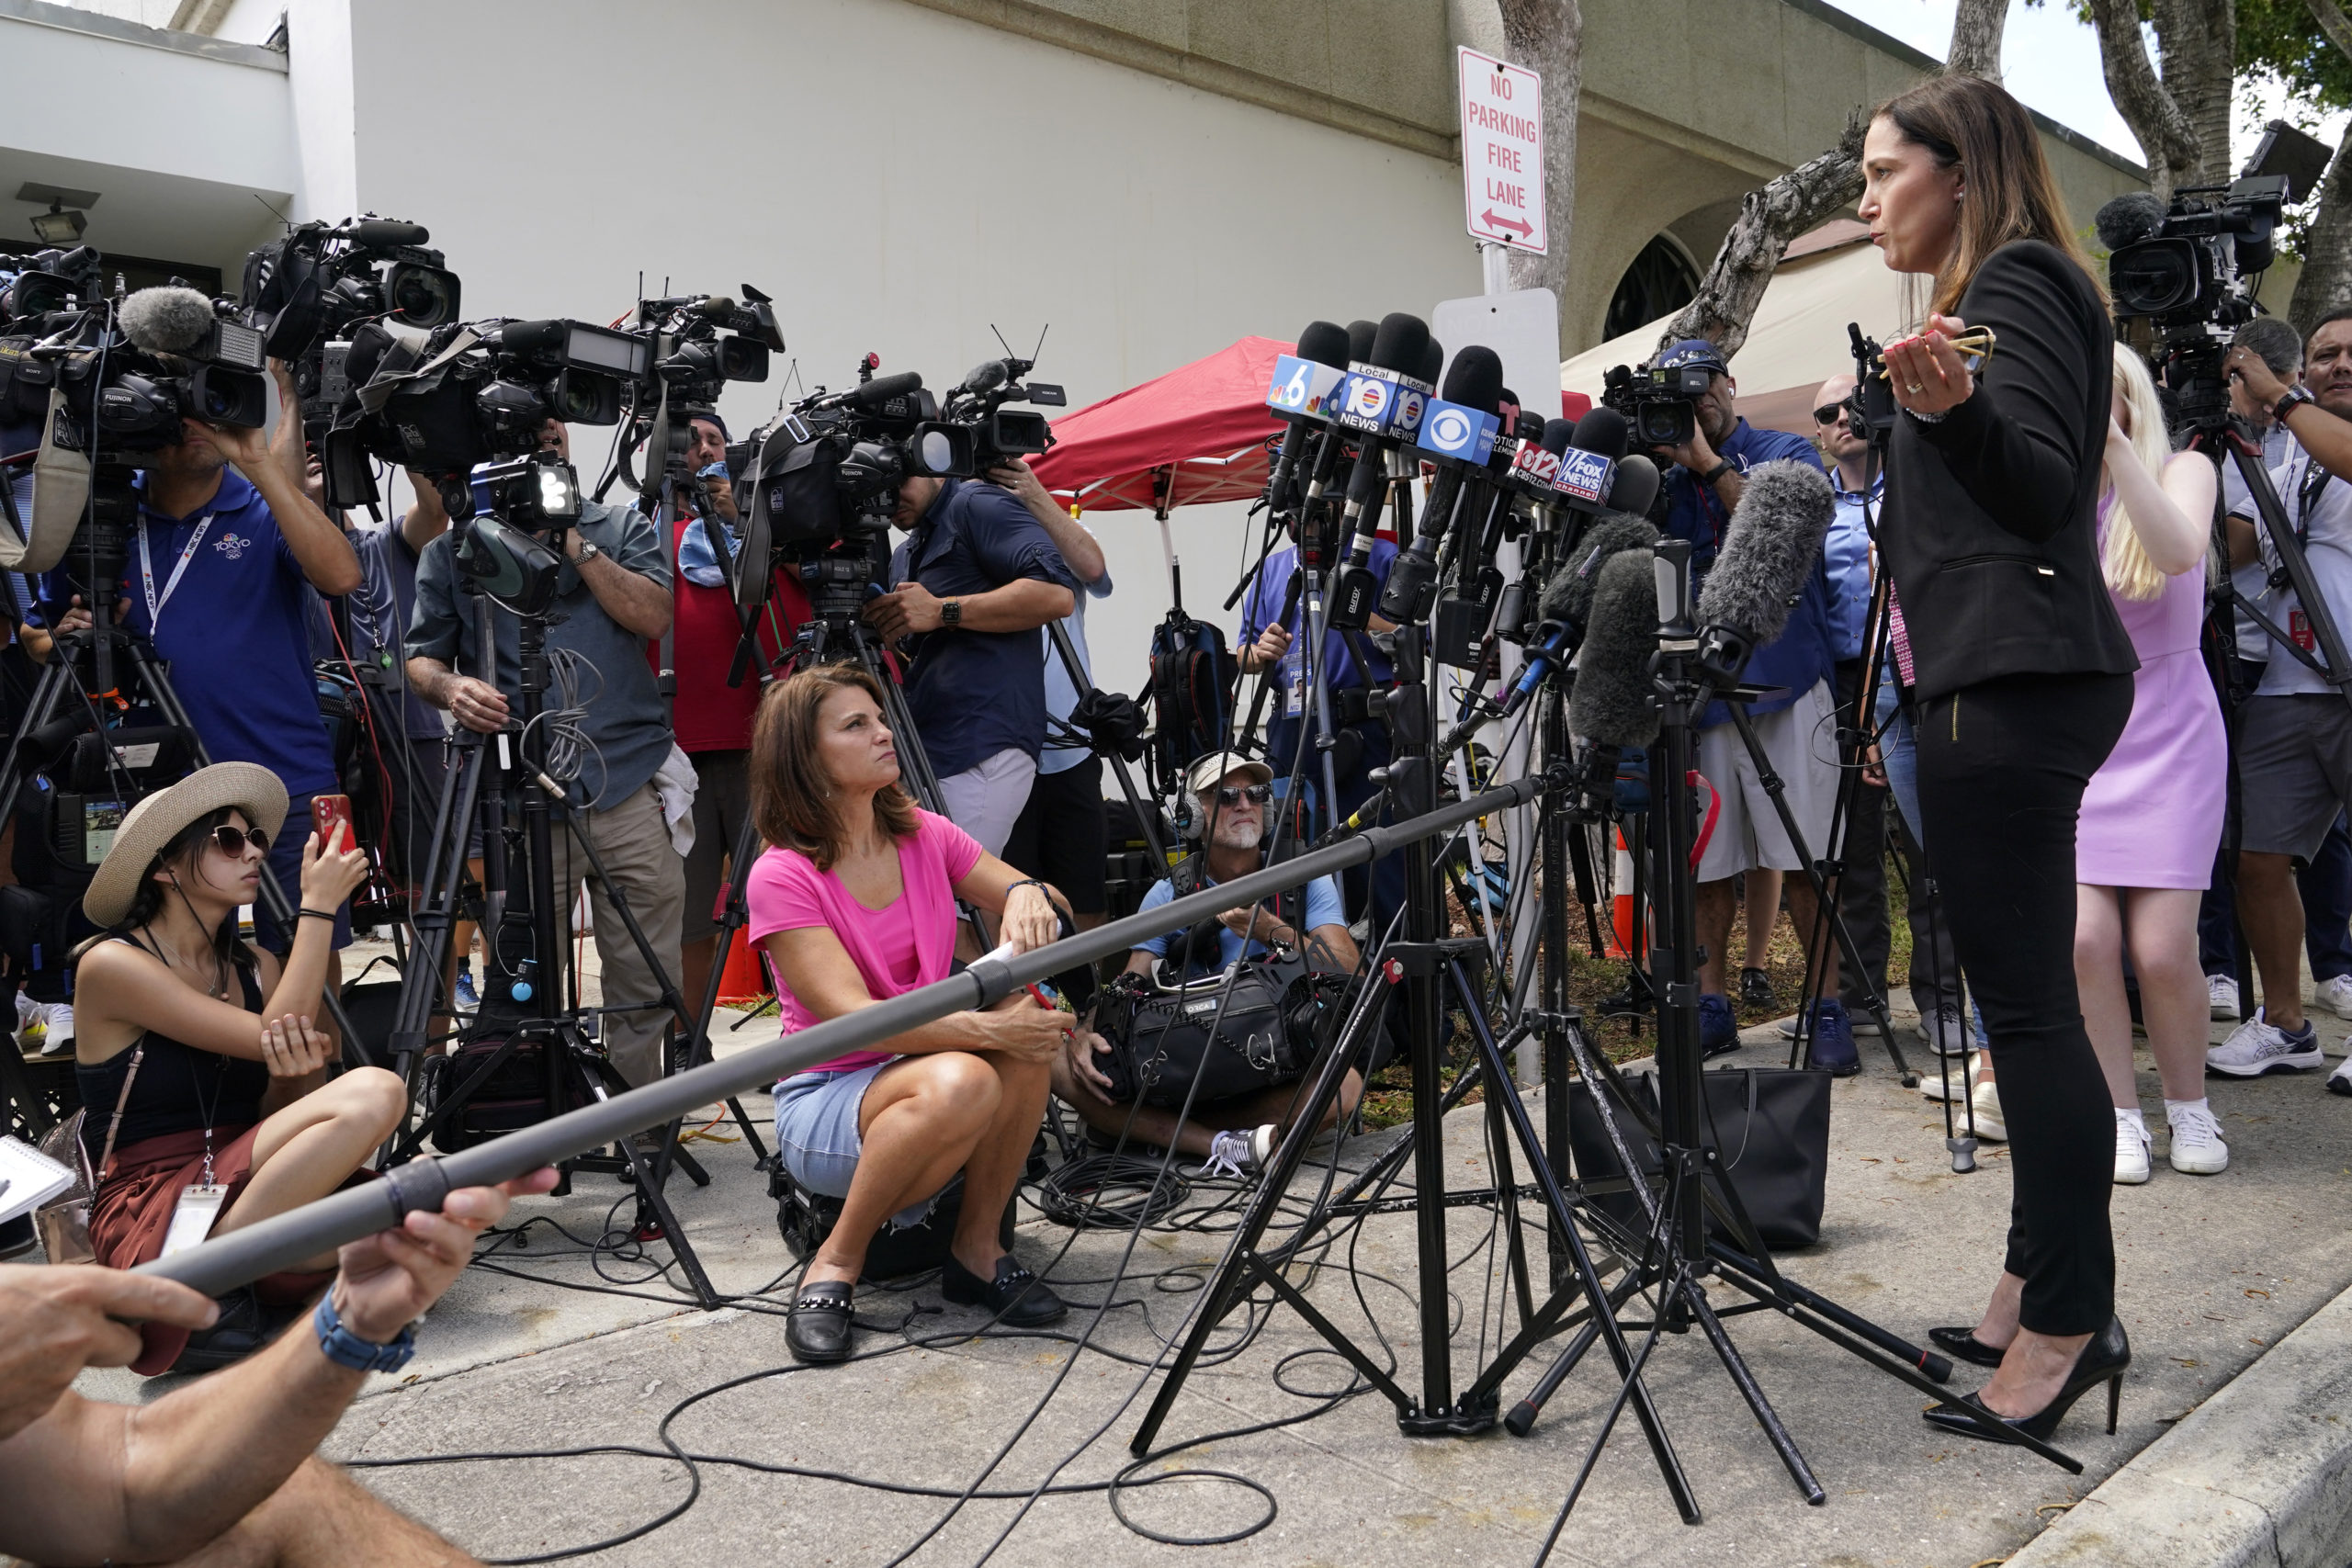 Attorney Deanna Shullman, who represents the Wall Street Journal, talks with the news media outside of the Paul G. Rogers Federal Courthouse. Attorneys for media companies are presenting their case before a federal magistrate judge to make public the affidavit supporting the search warrant on Donald Trump's Mar-a-Lago estate